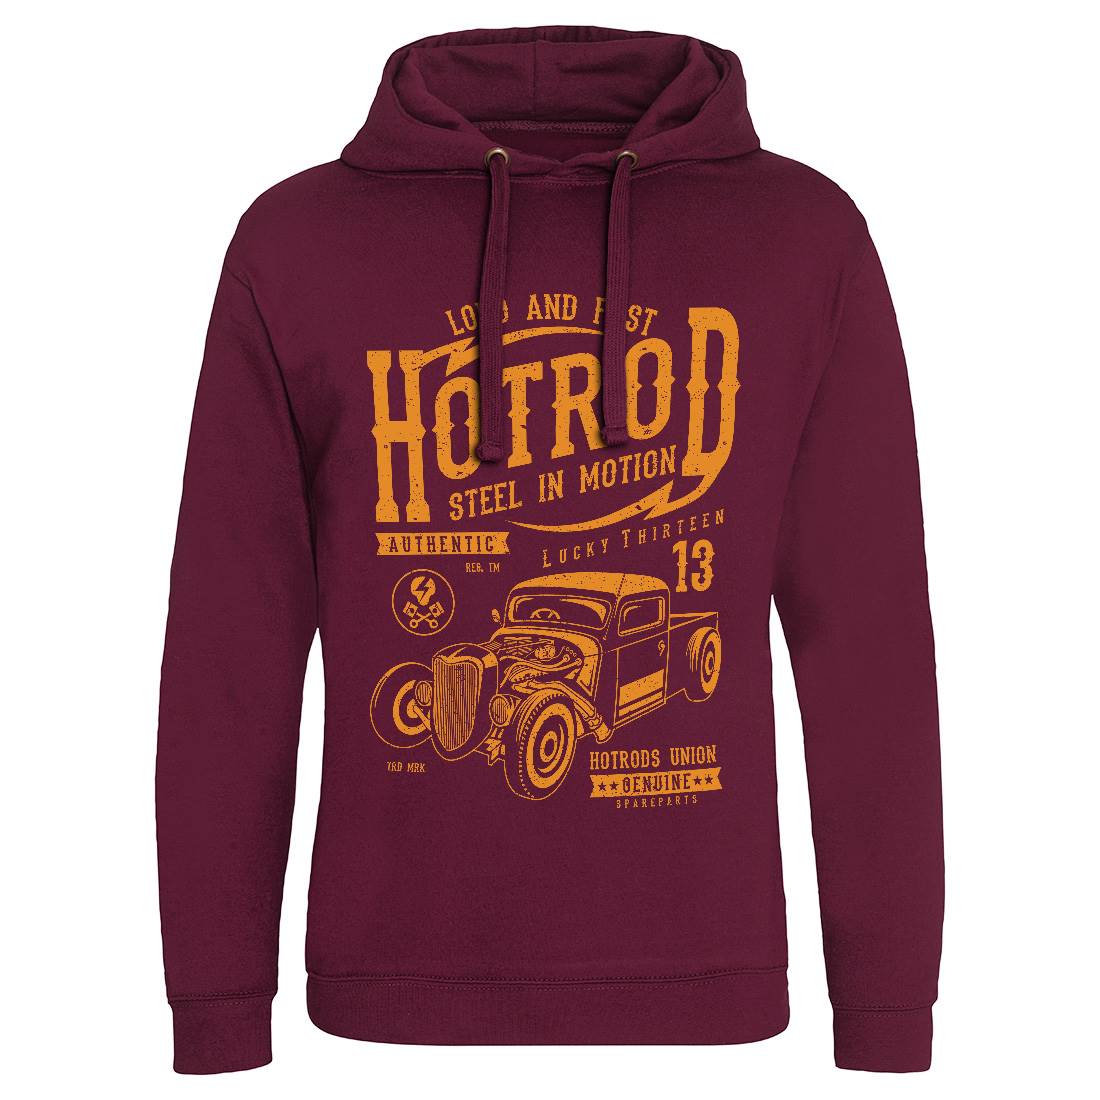 Steel In Motion Mens Hoodie Without Pocket Cars A767